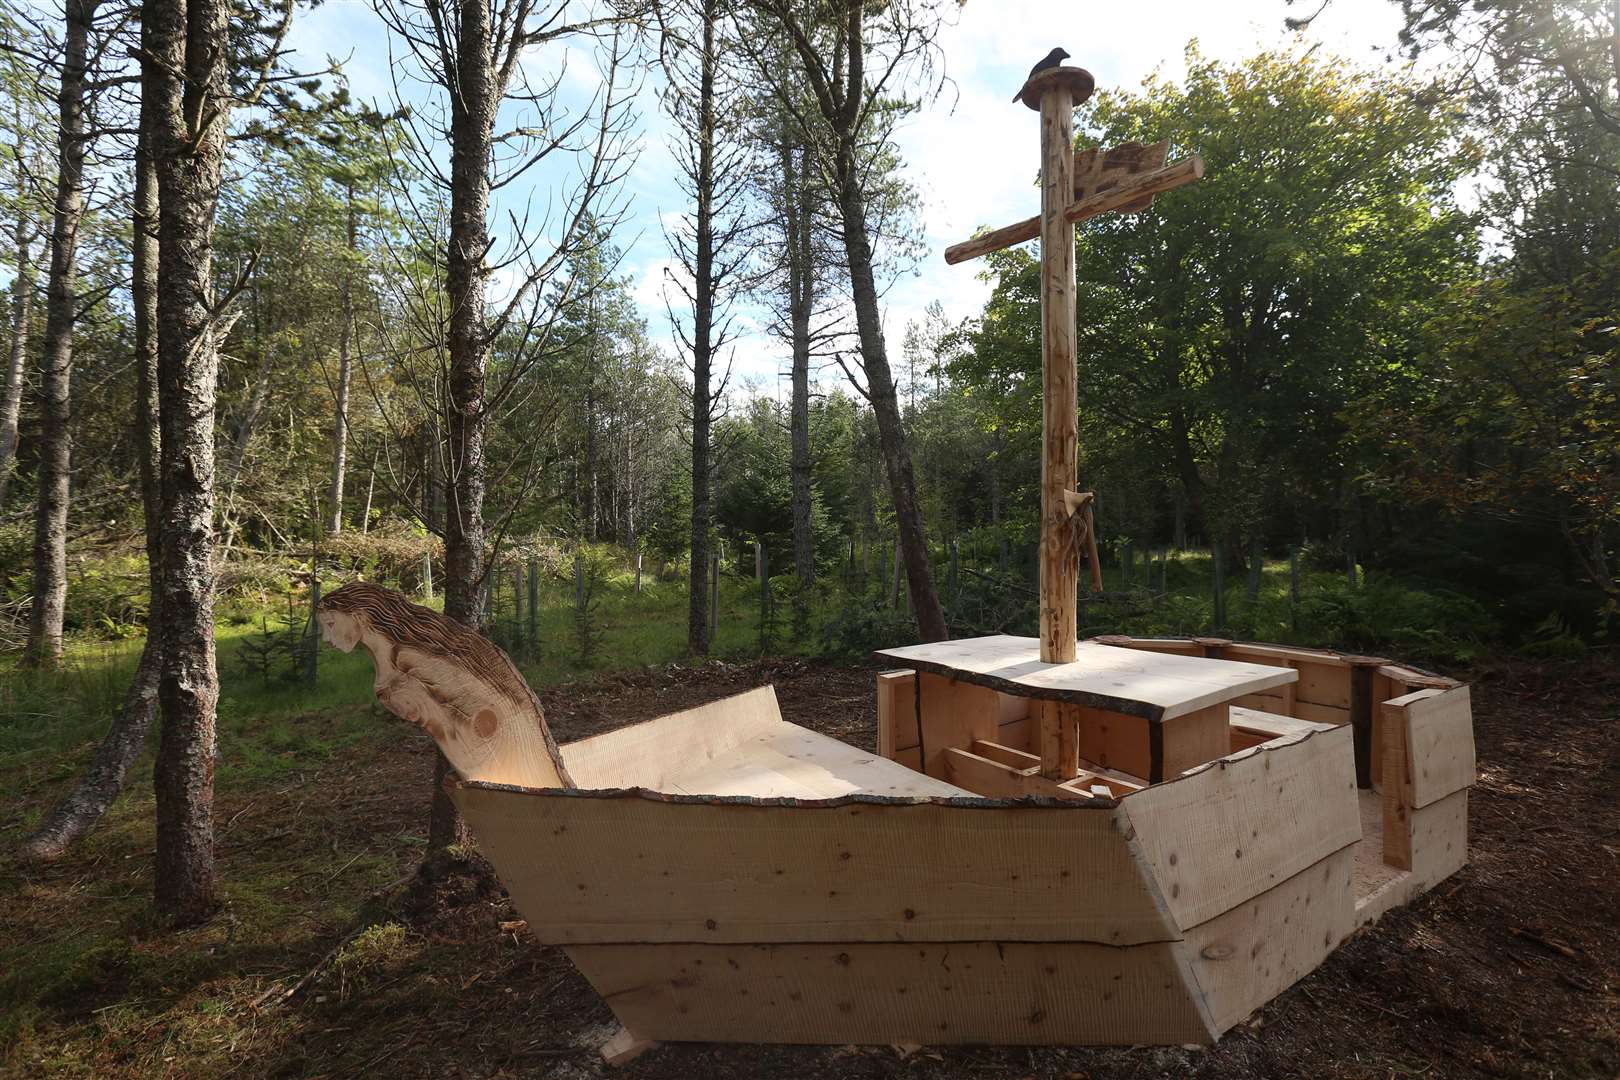 A boat-themed picnic table created in a Dunnet Forest as part of the Loggerheads series. Picture: BBC Scotland / Mighty Scotland